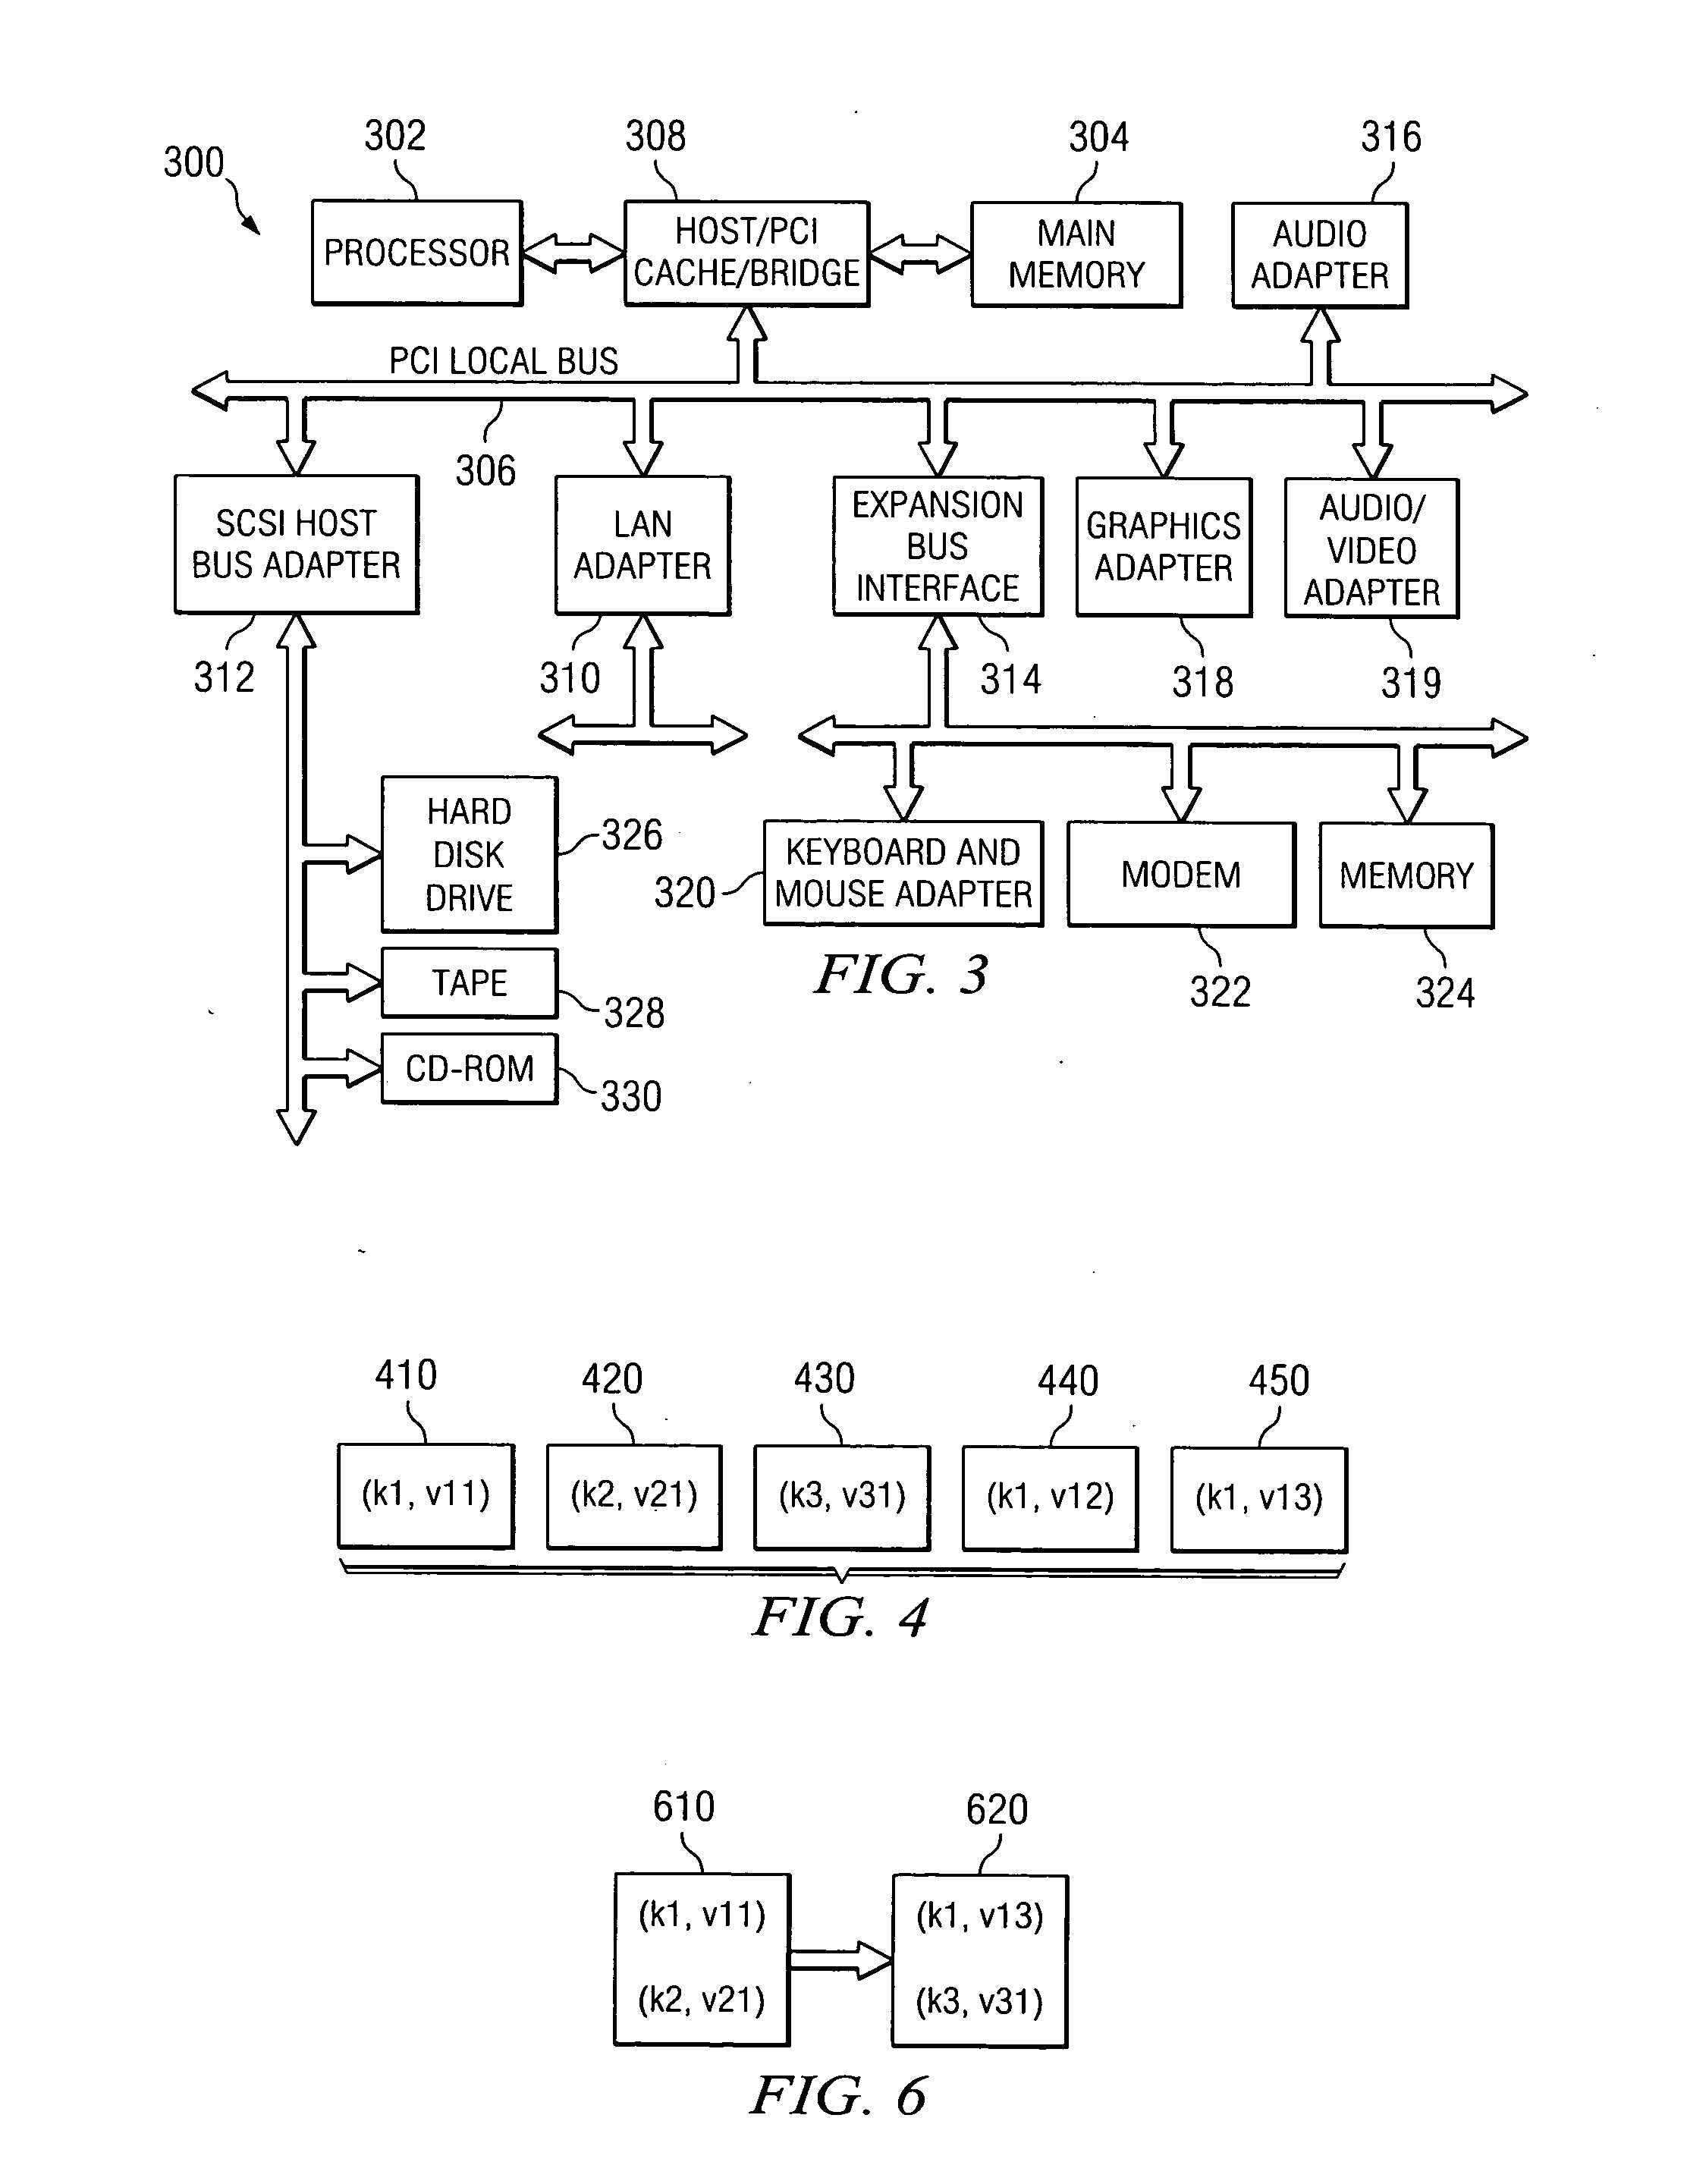 System and method for maintaining checkpoints of a keyed data structure using a sequential log